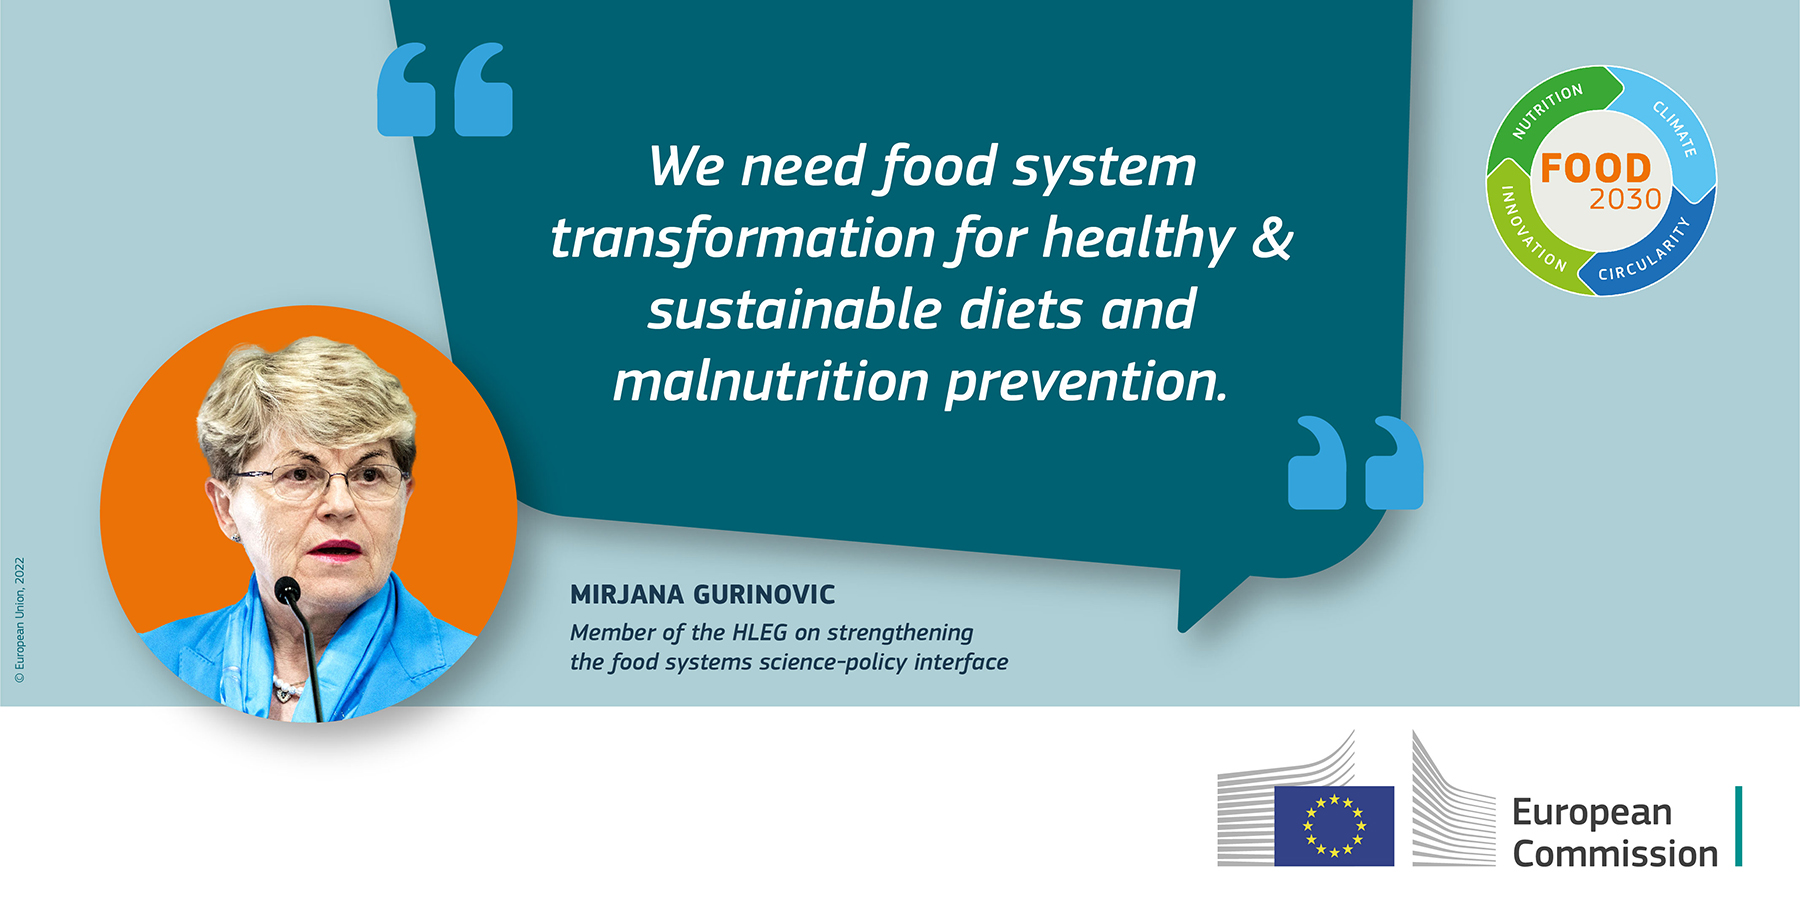 <h3>Mirjana Gurinovic, from Serbia - member of the European Commission (EC) High Level Expert Group (HLEG) on strengthening the Food Systems Science policy interfaces</h3>